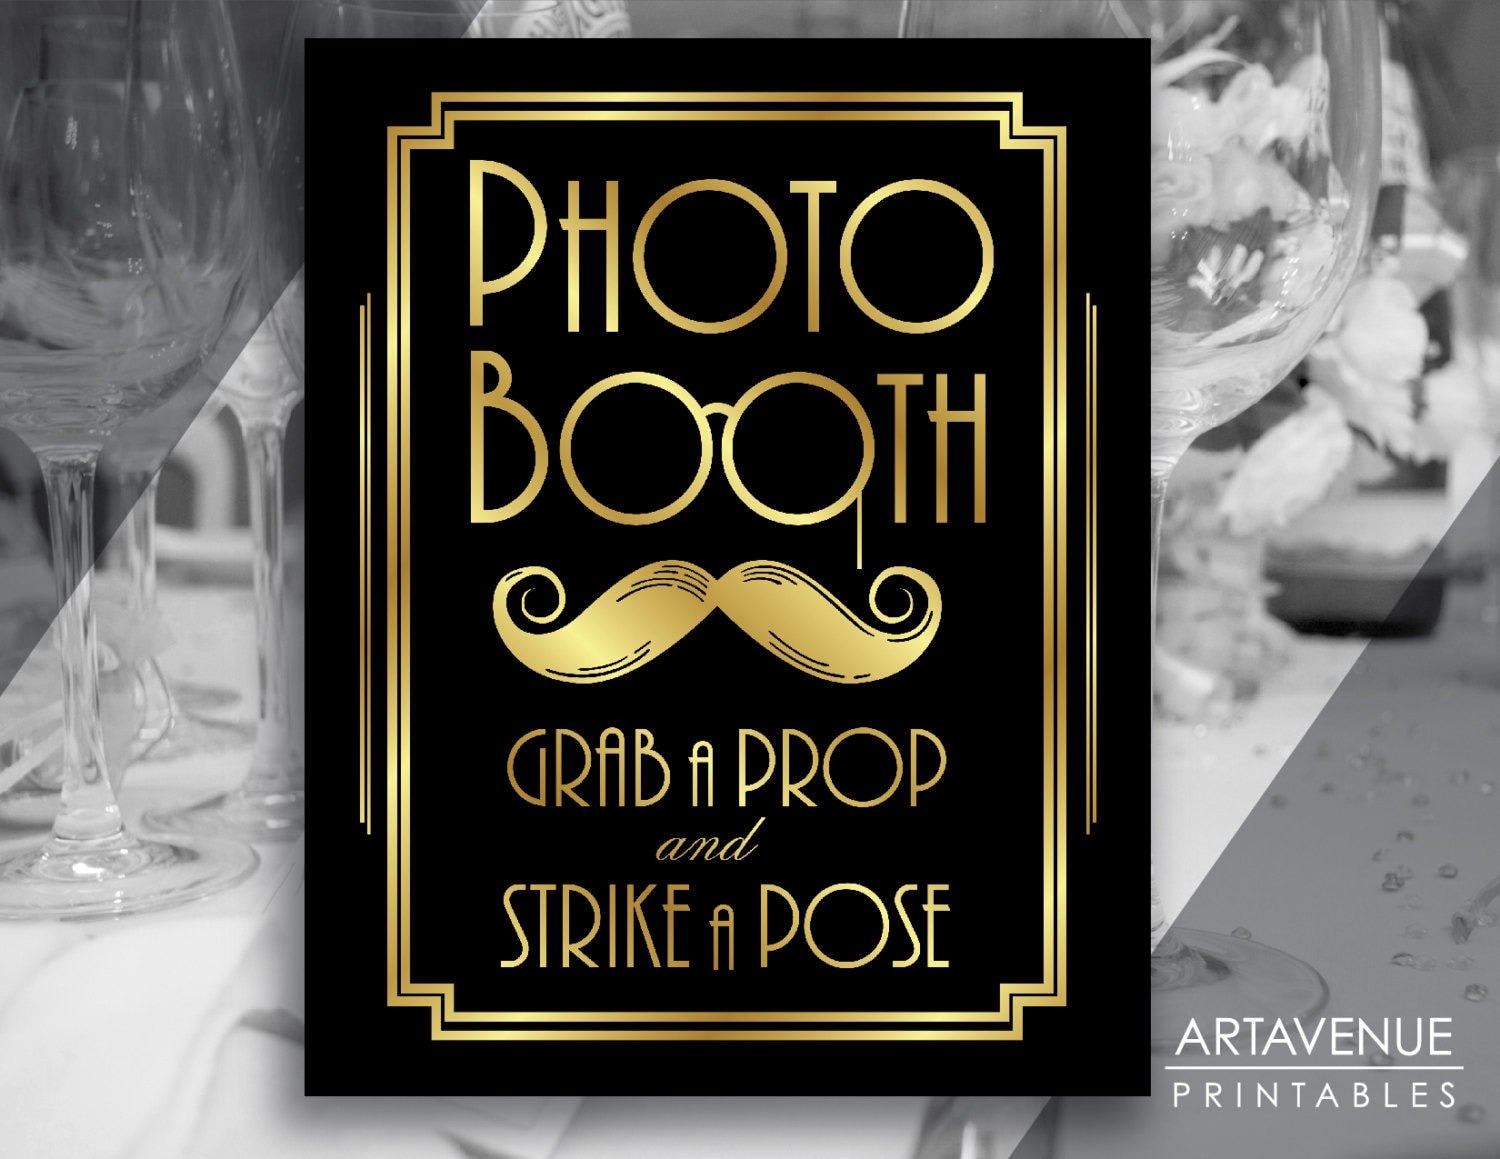 Roaring 20s Photo Booth Props, 43pcs Gatsby Photo Booth Props, Roaring 20s Party Decorations by Torvik, Great Gatsby Party Decorations, Suit for